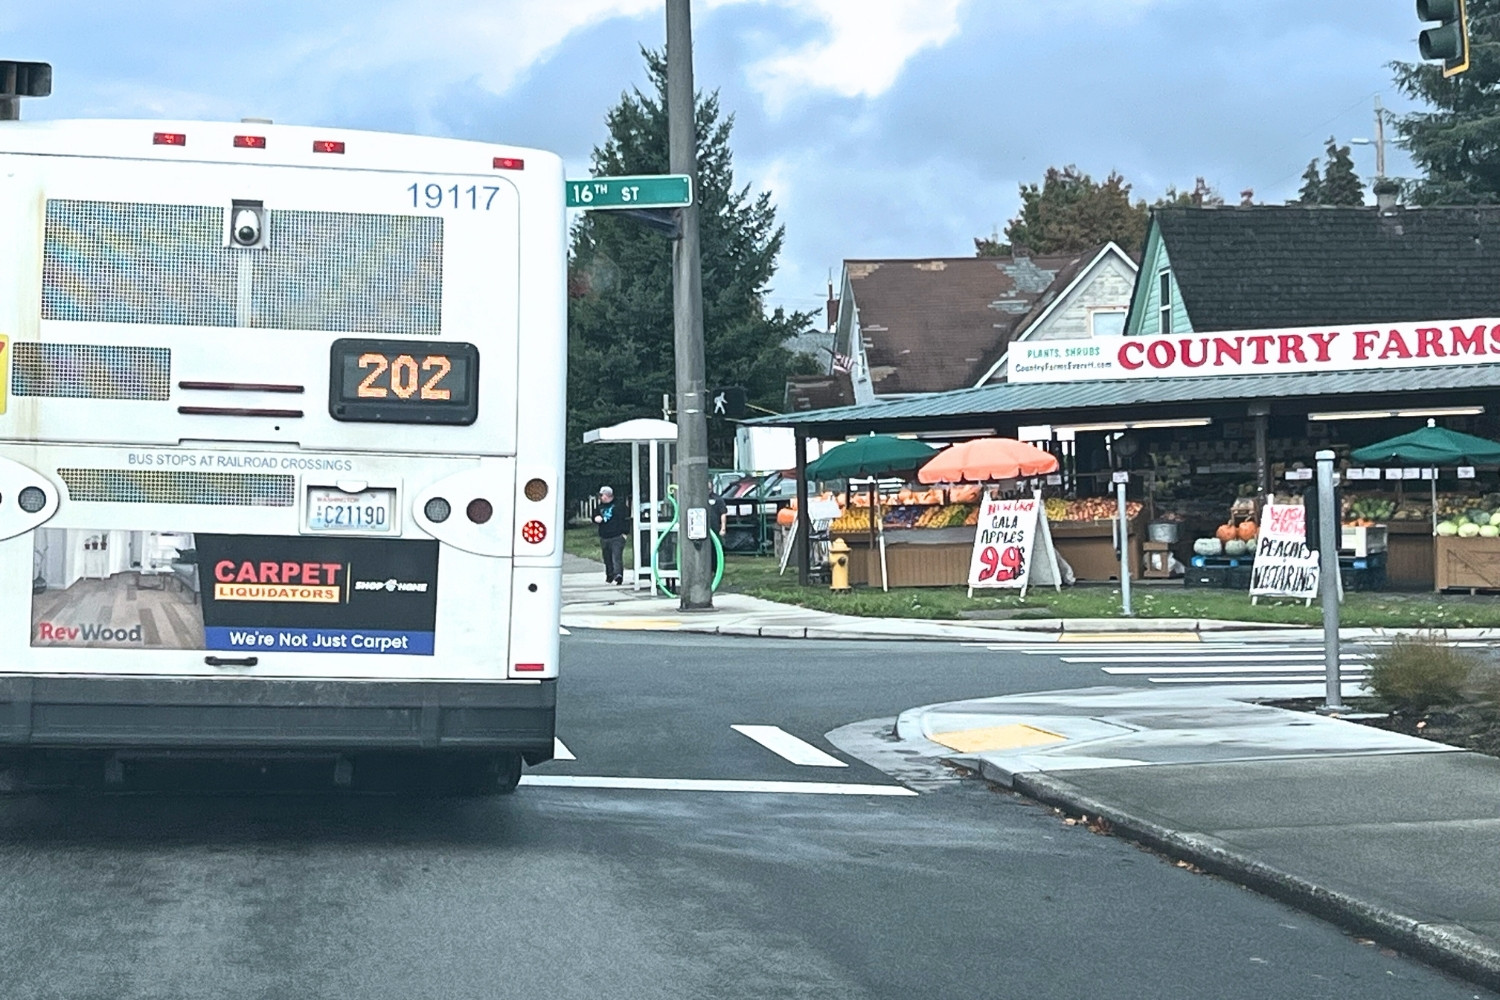 A Community Transit bus serving Route 202 drives by the Country Farms fruit and vegetable stand in Everett.